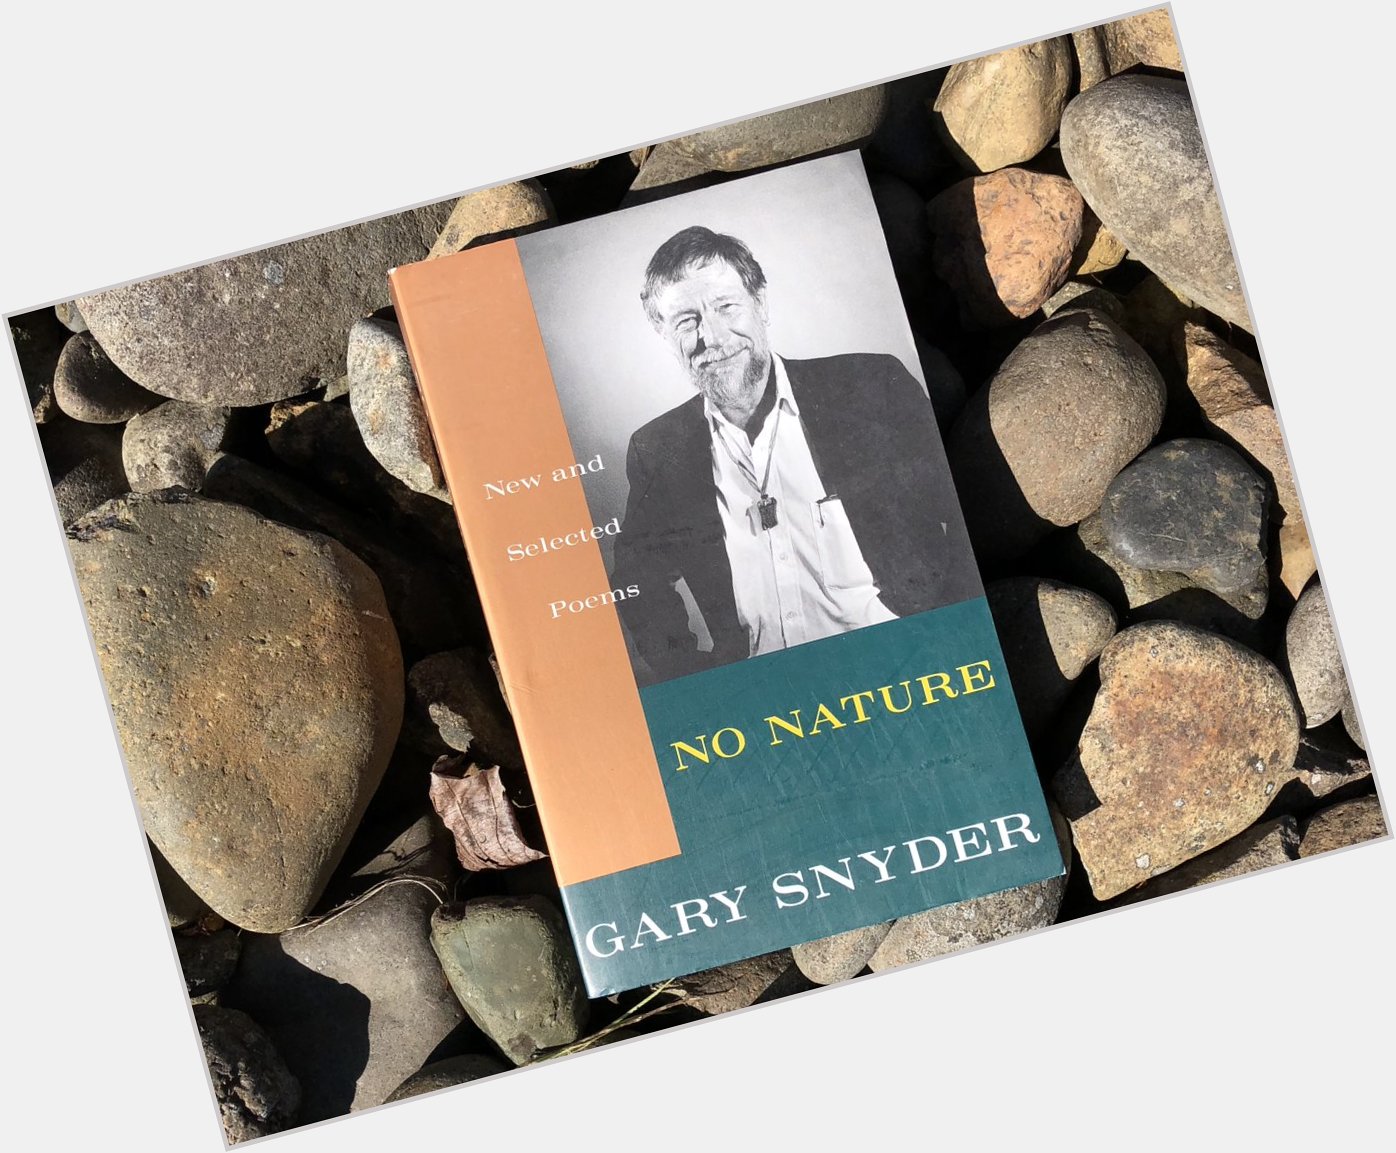 Happy 90th birthday to Pulitzer Prize winning poet and man of letters, Gary Snyder! 